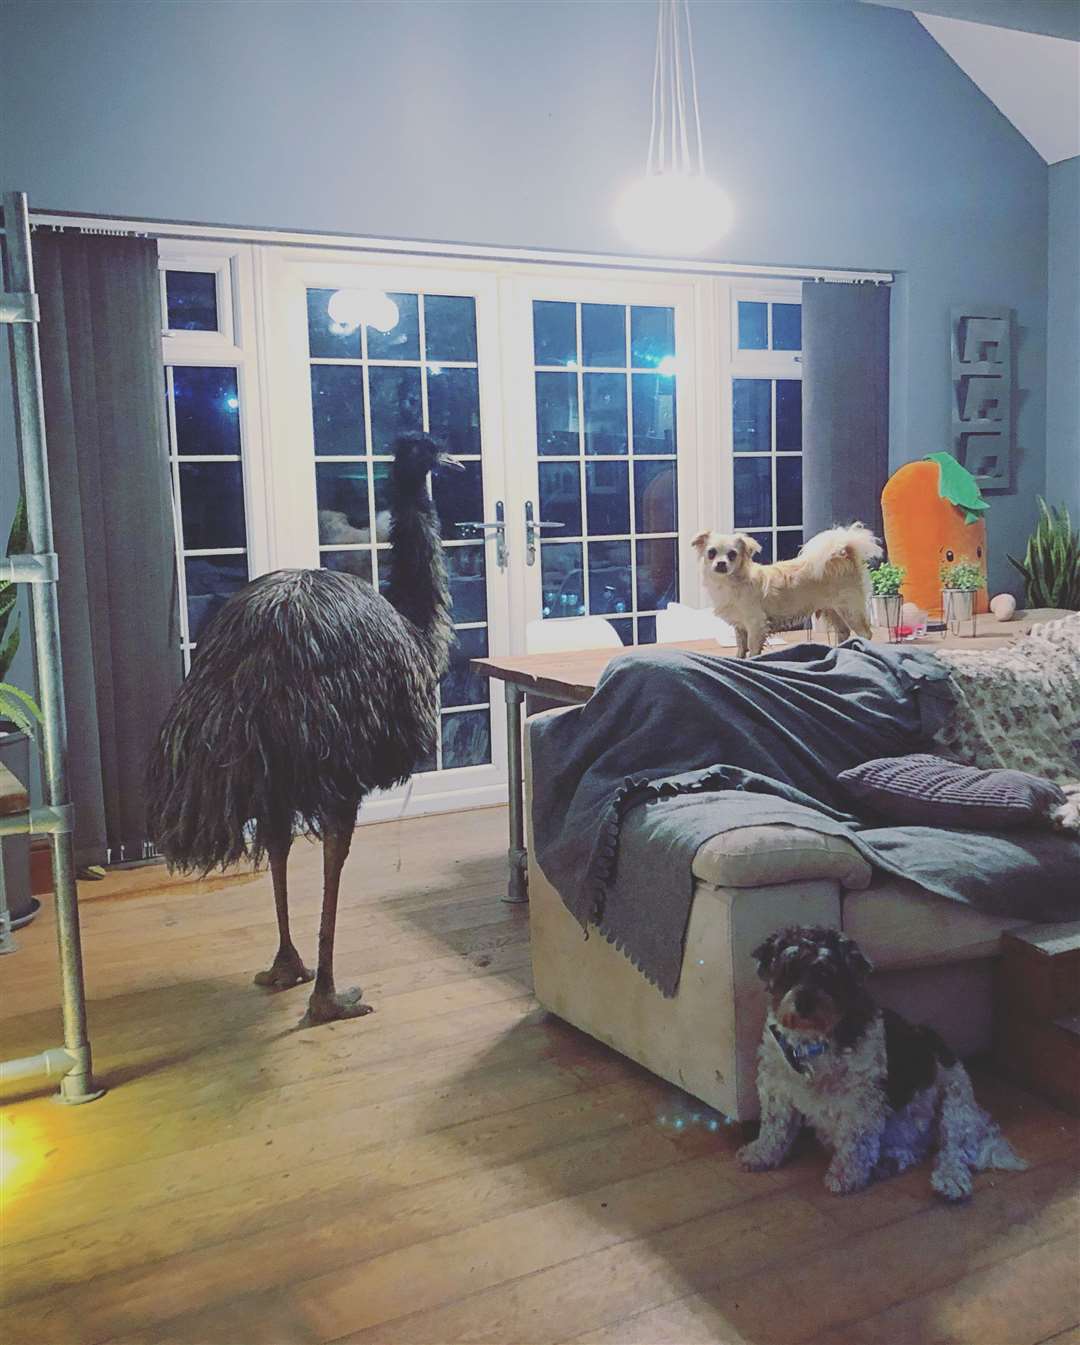 The emu had been spotted on the loose in Iwade Road, Iwade